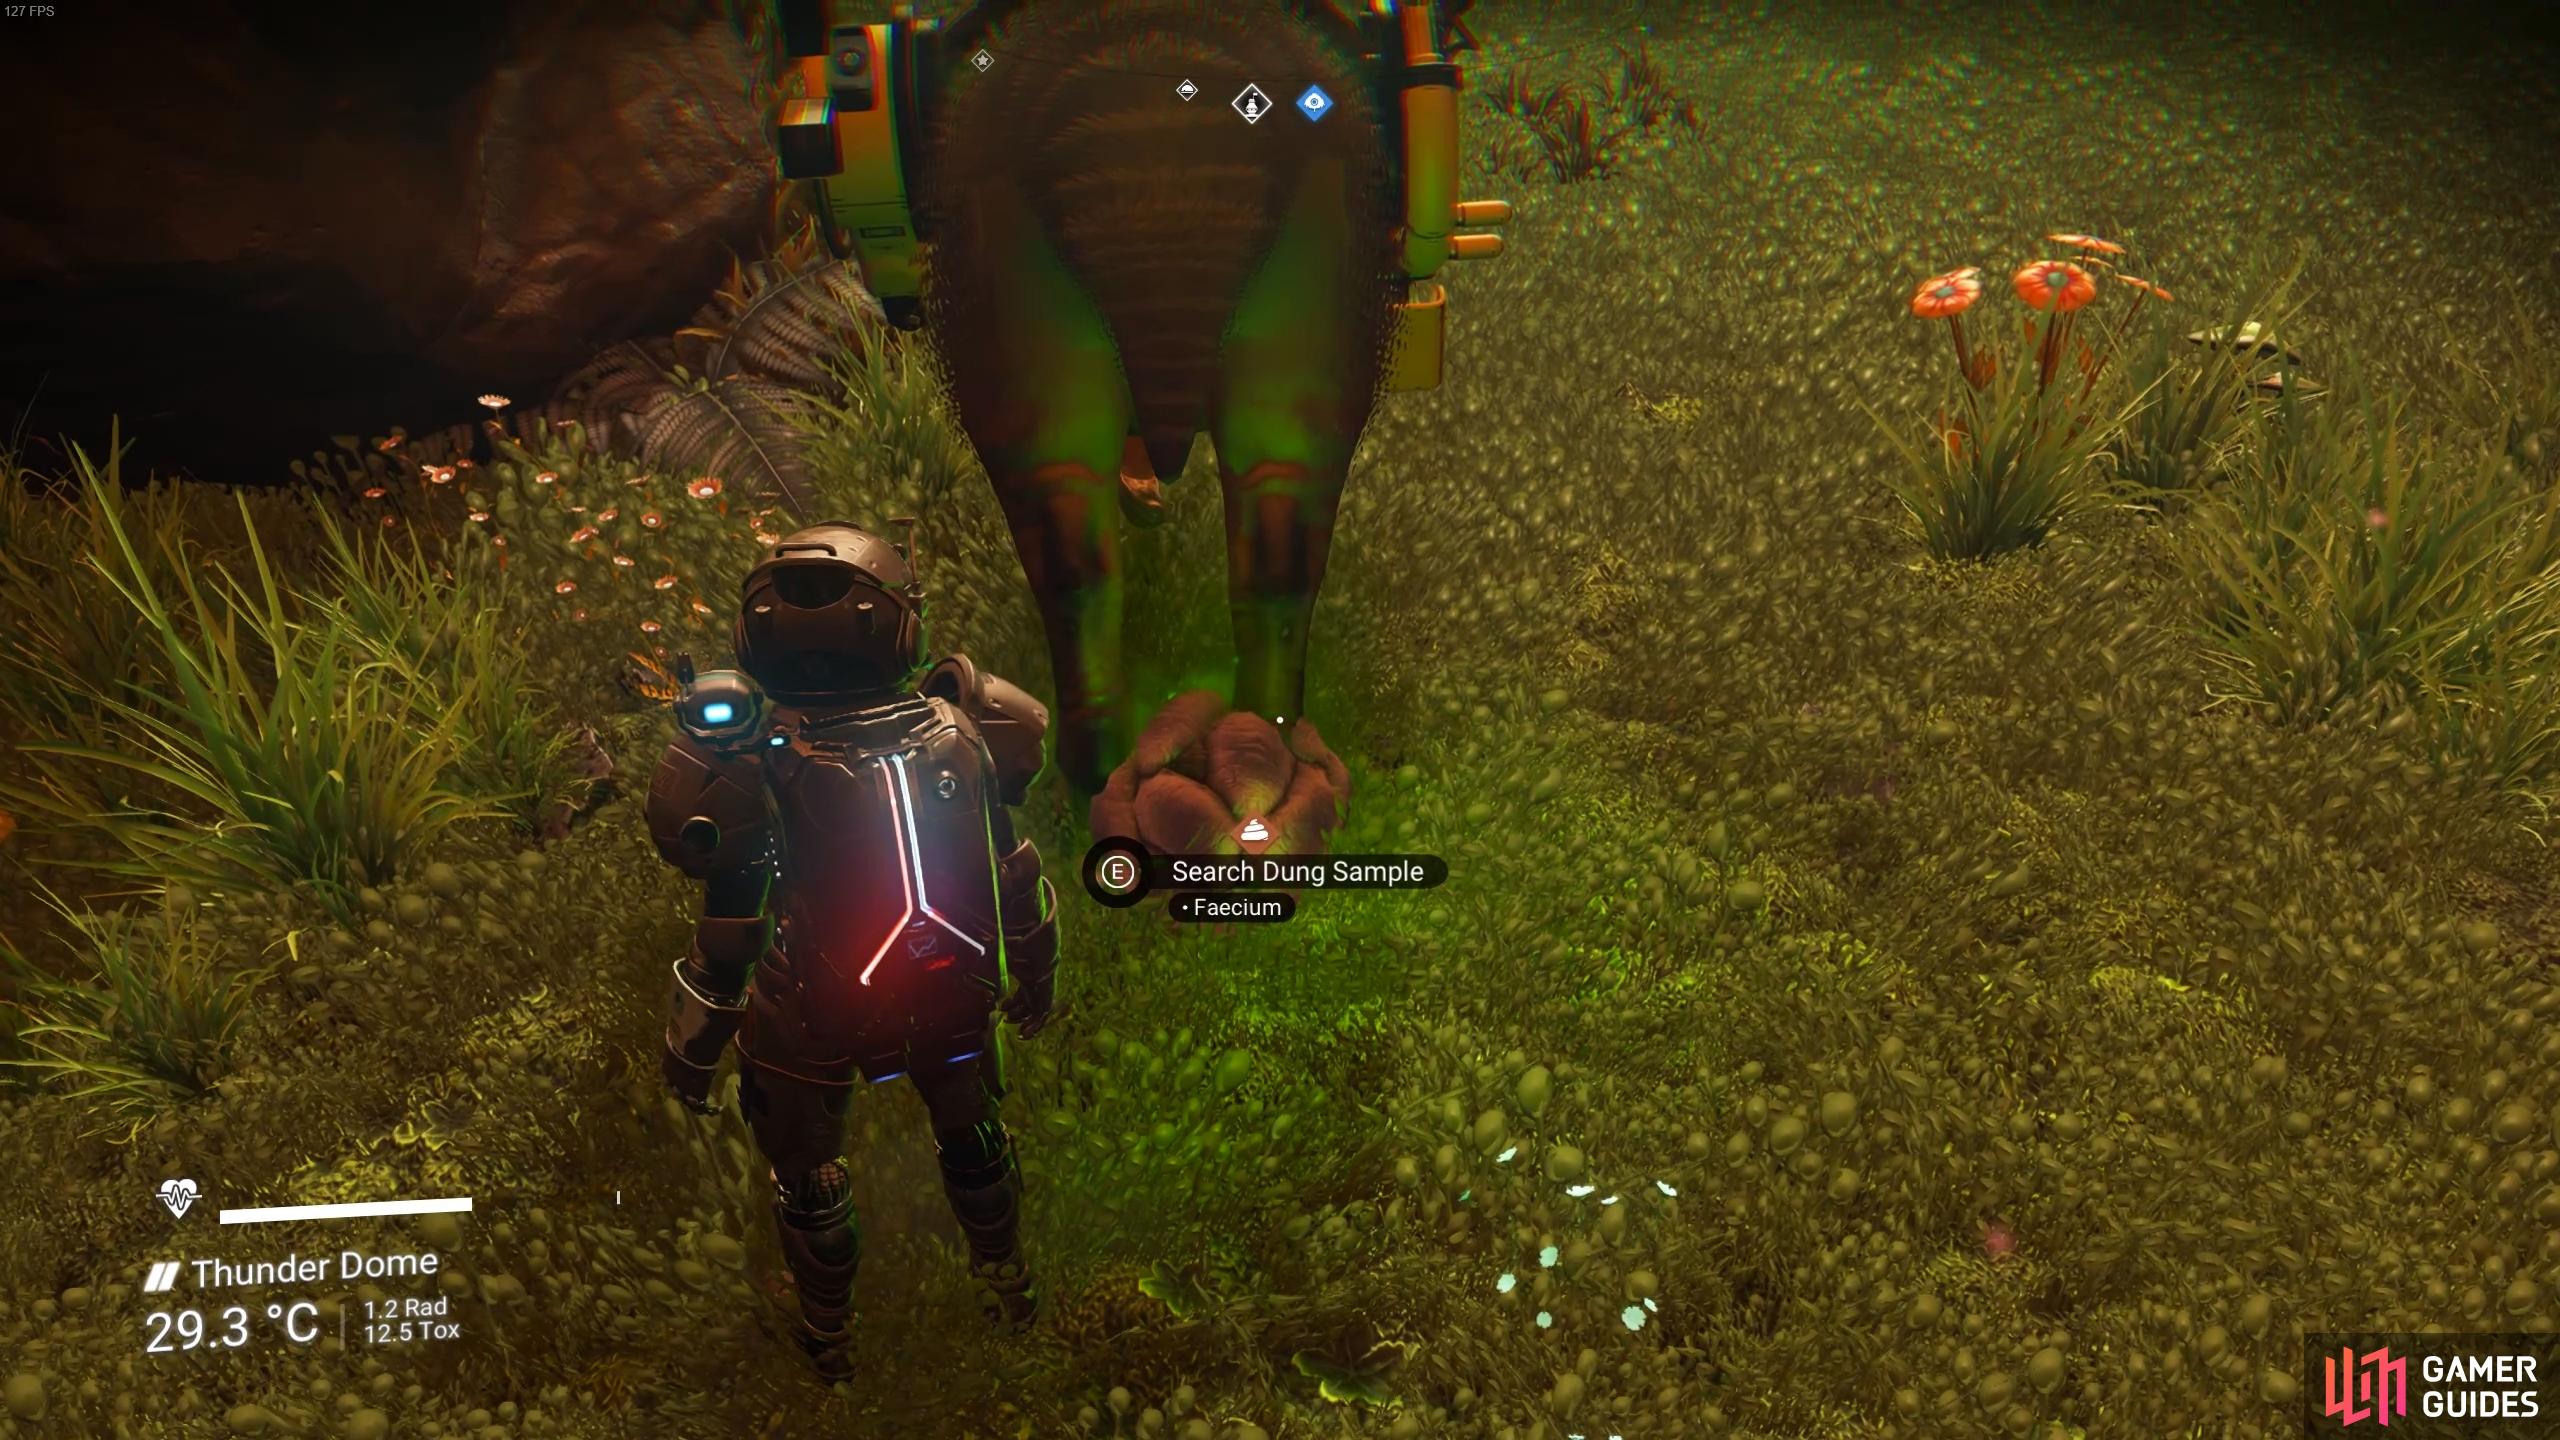 If you feed creatures with the pellets, they'll produce Faecium which you can loot.